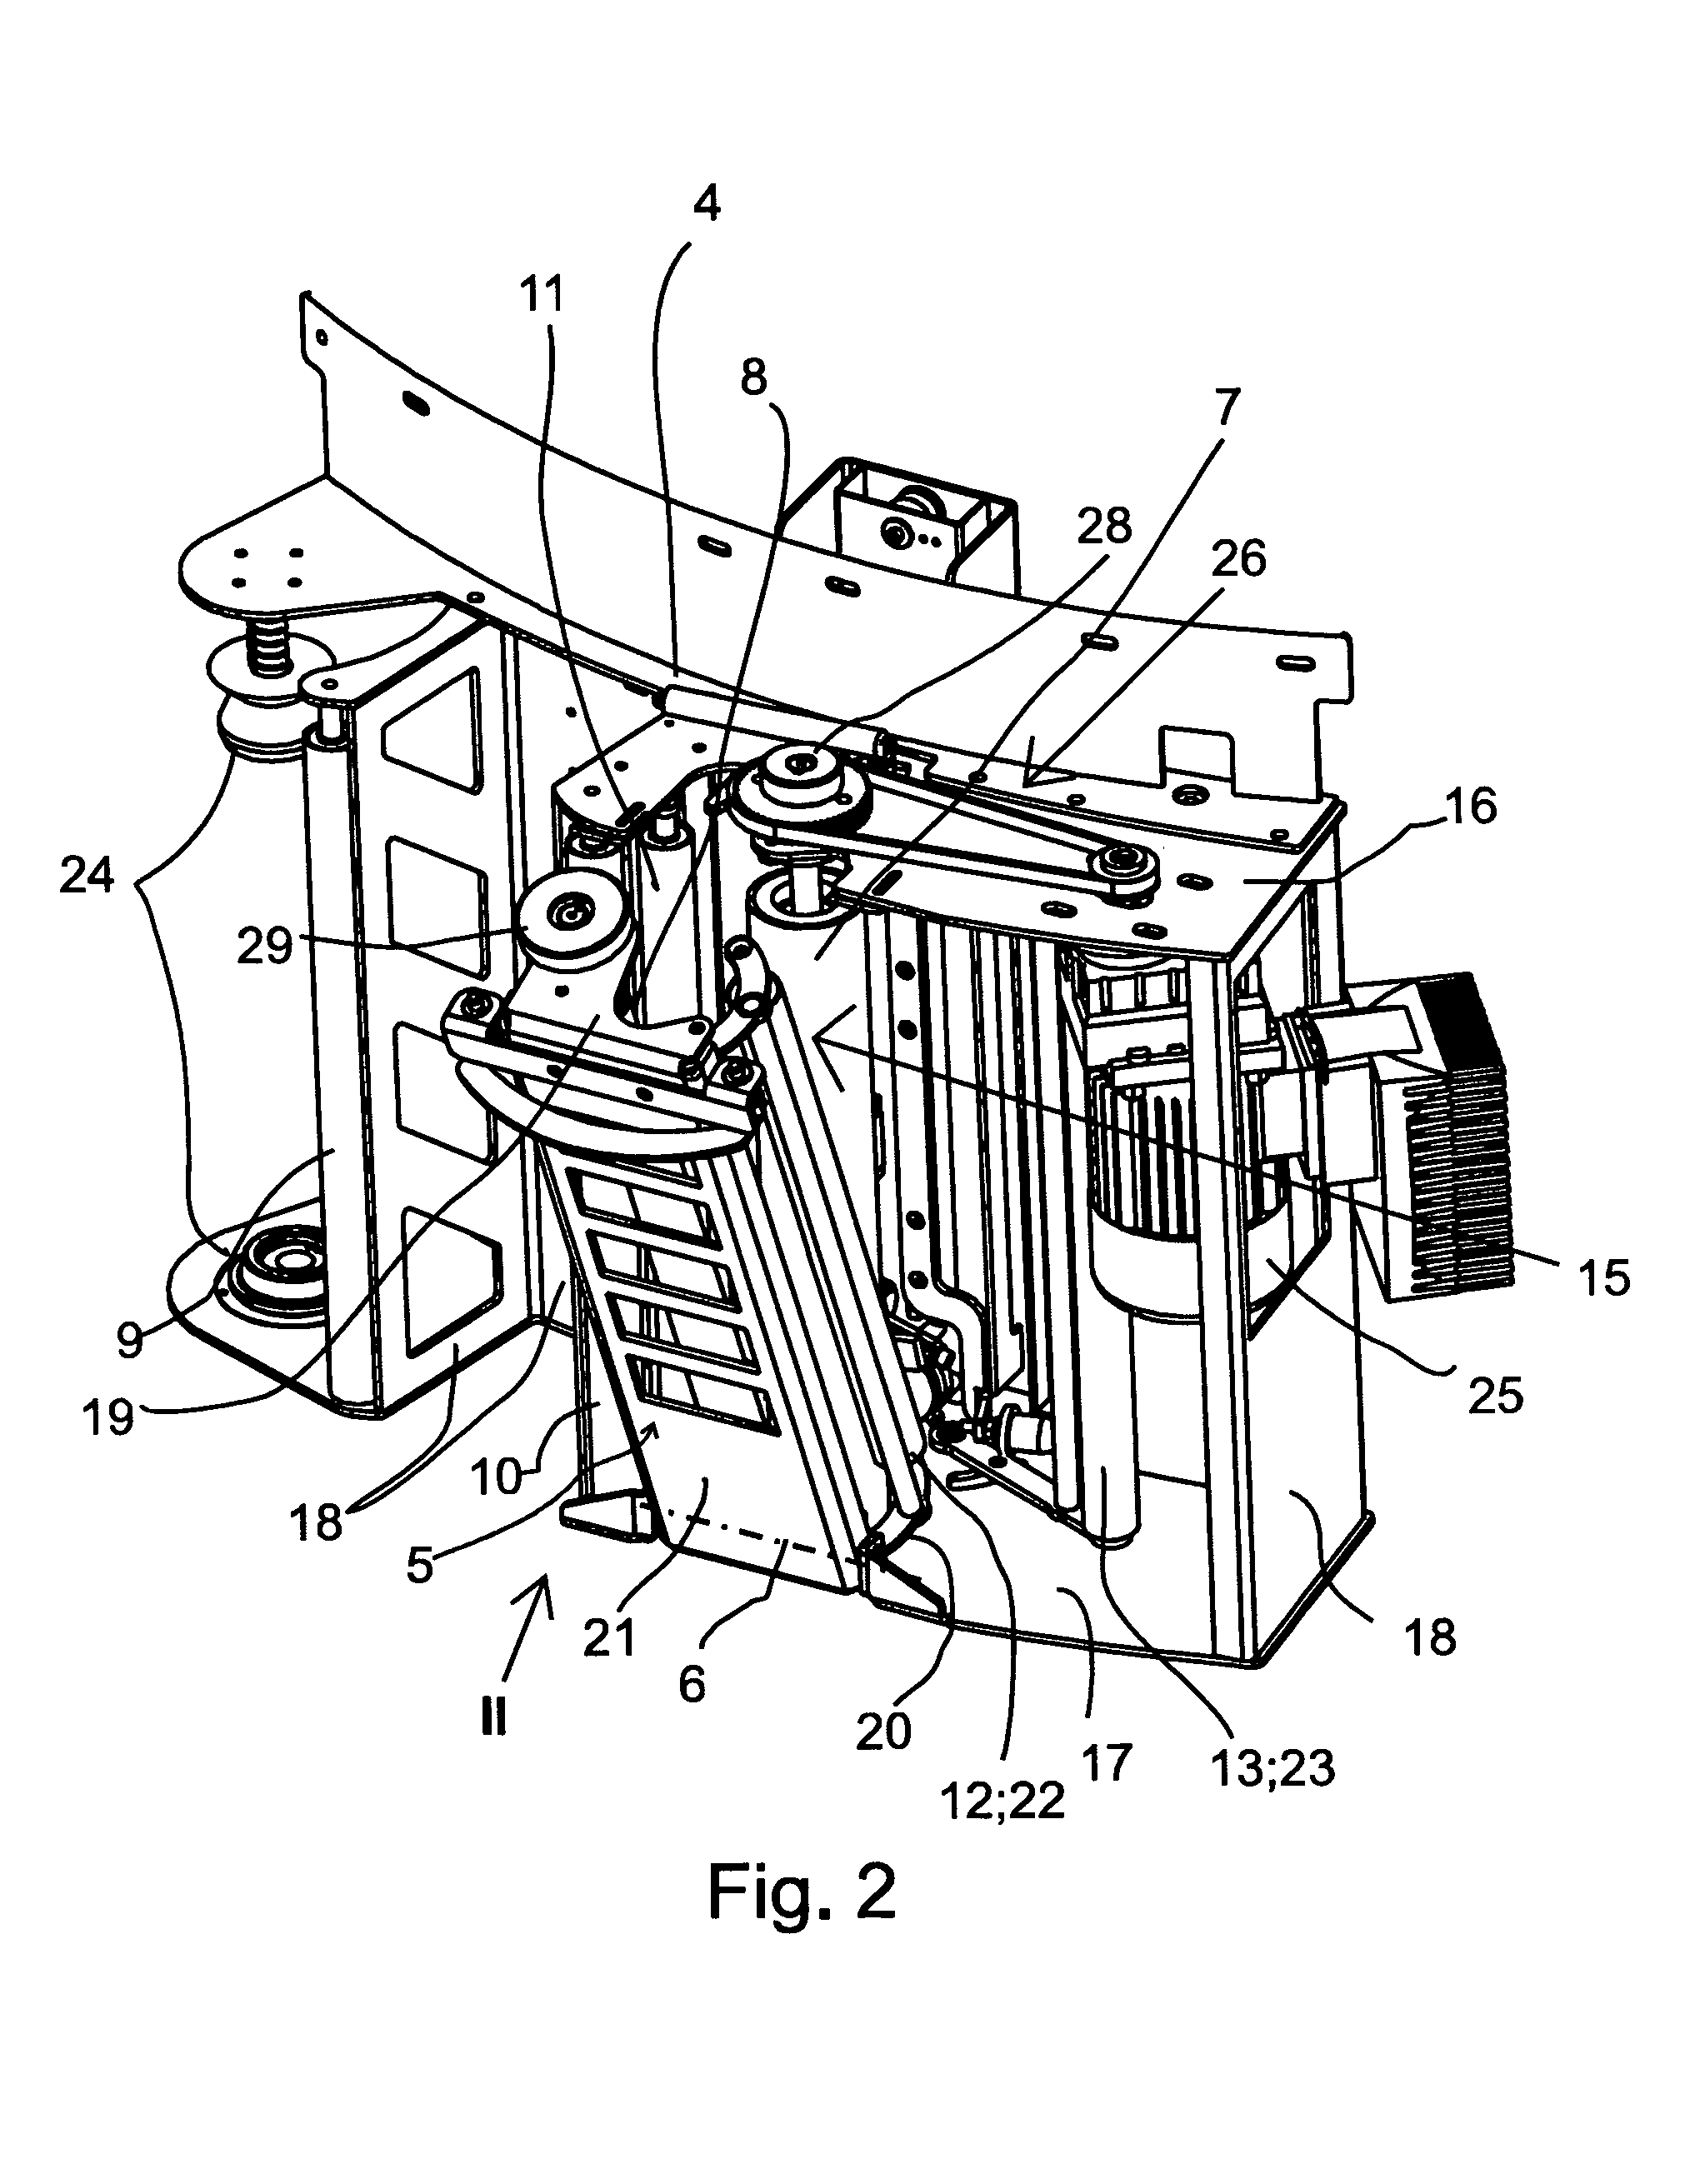 Film delivery device and use of same